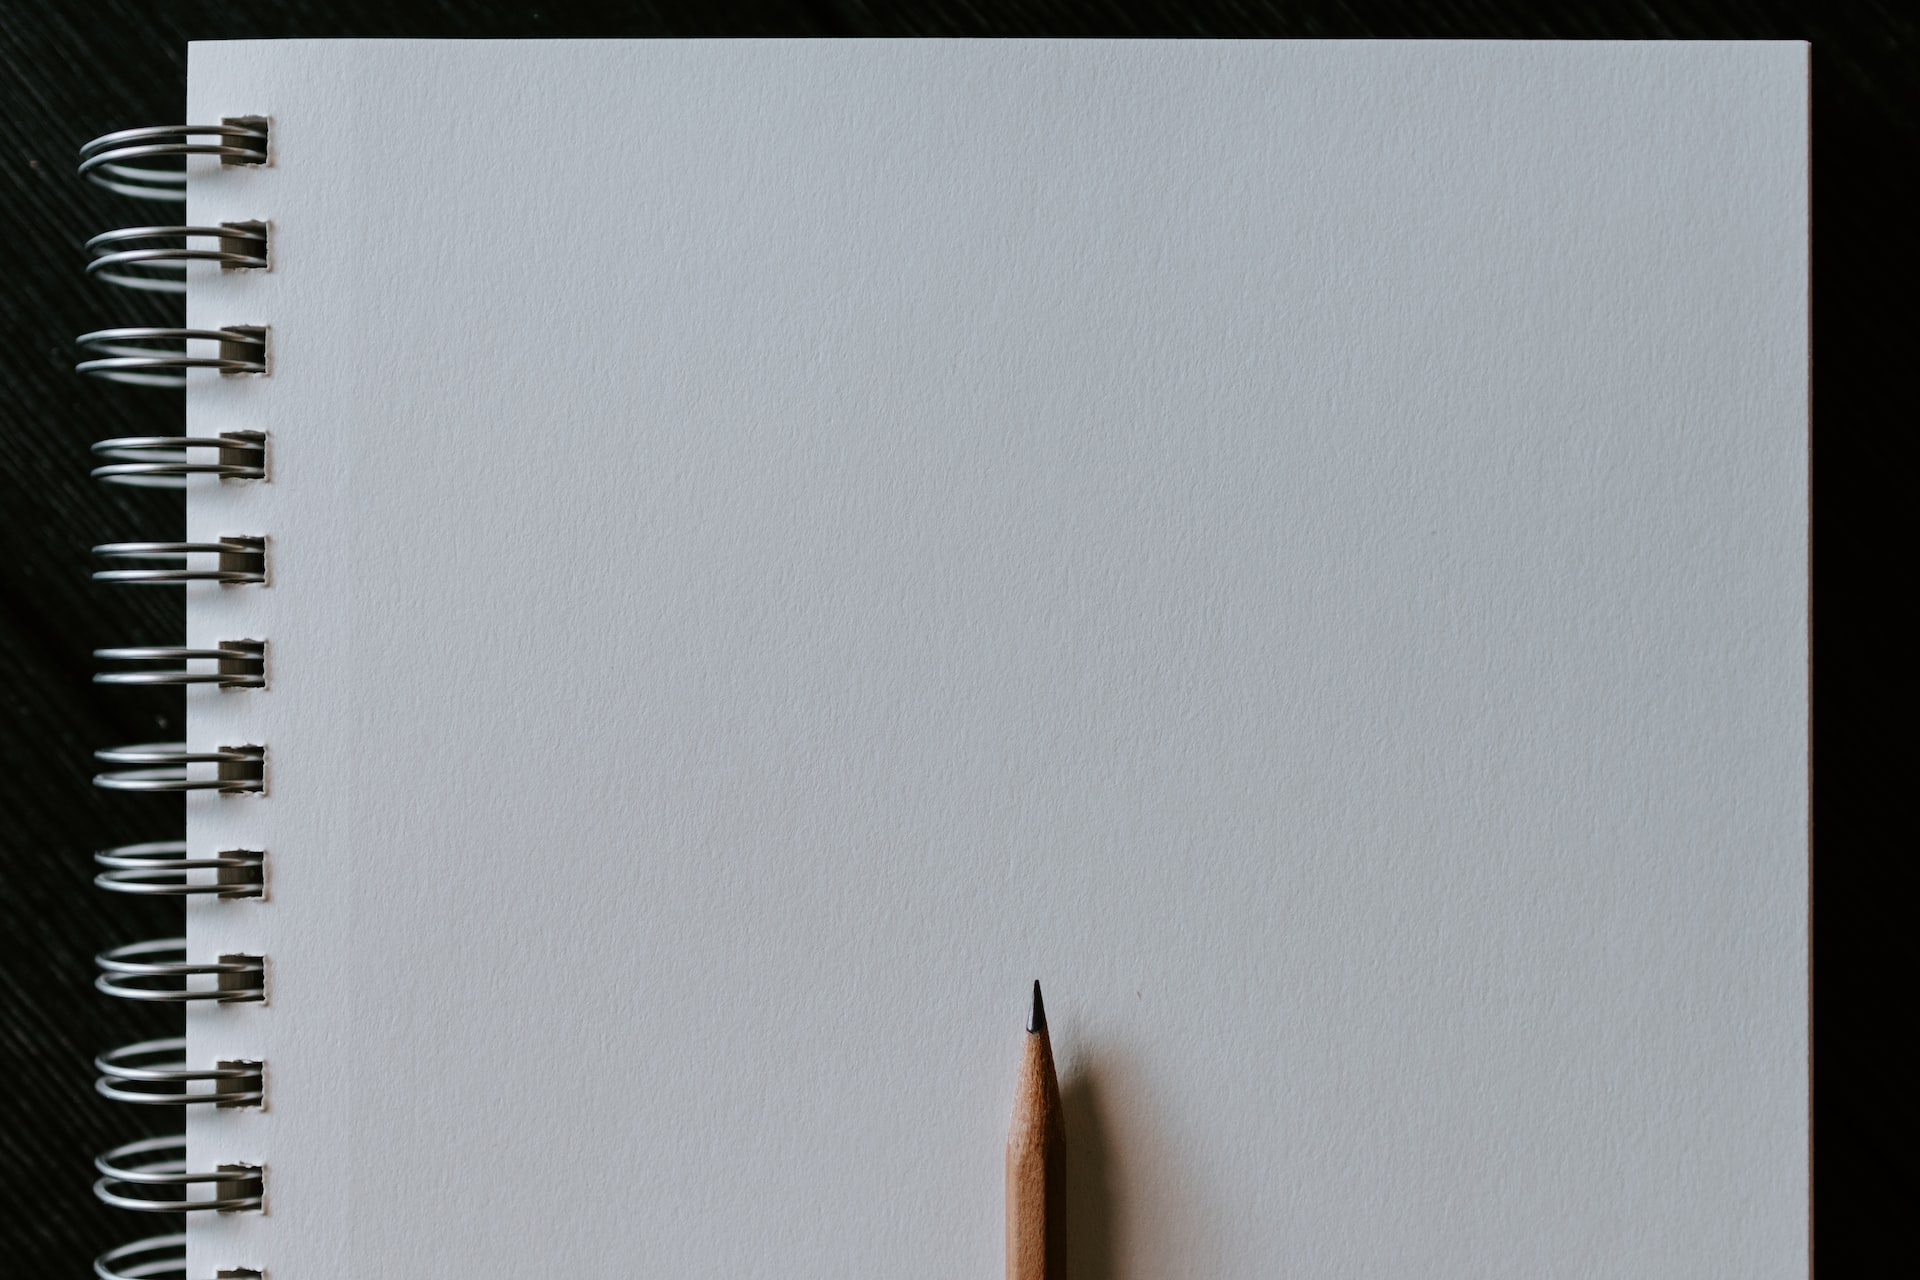 A blank spiral notebook with a freshly sharpened pencil resting on it